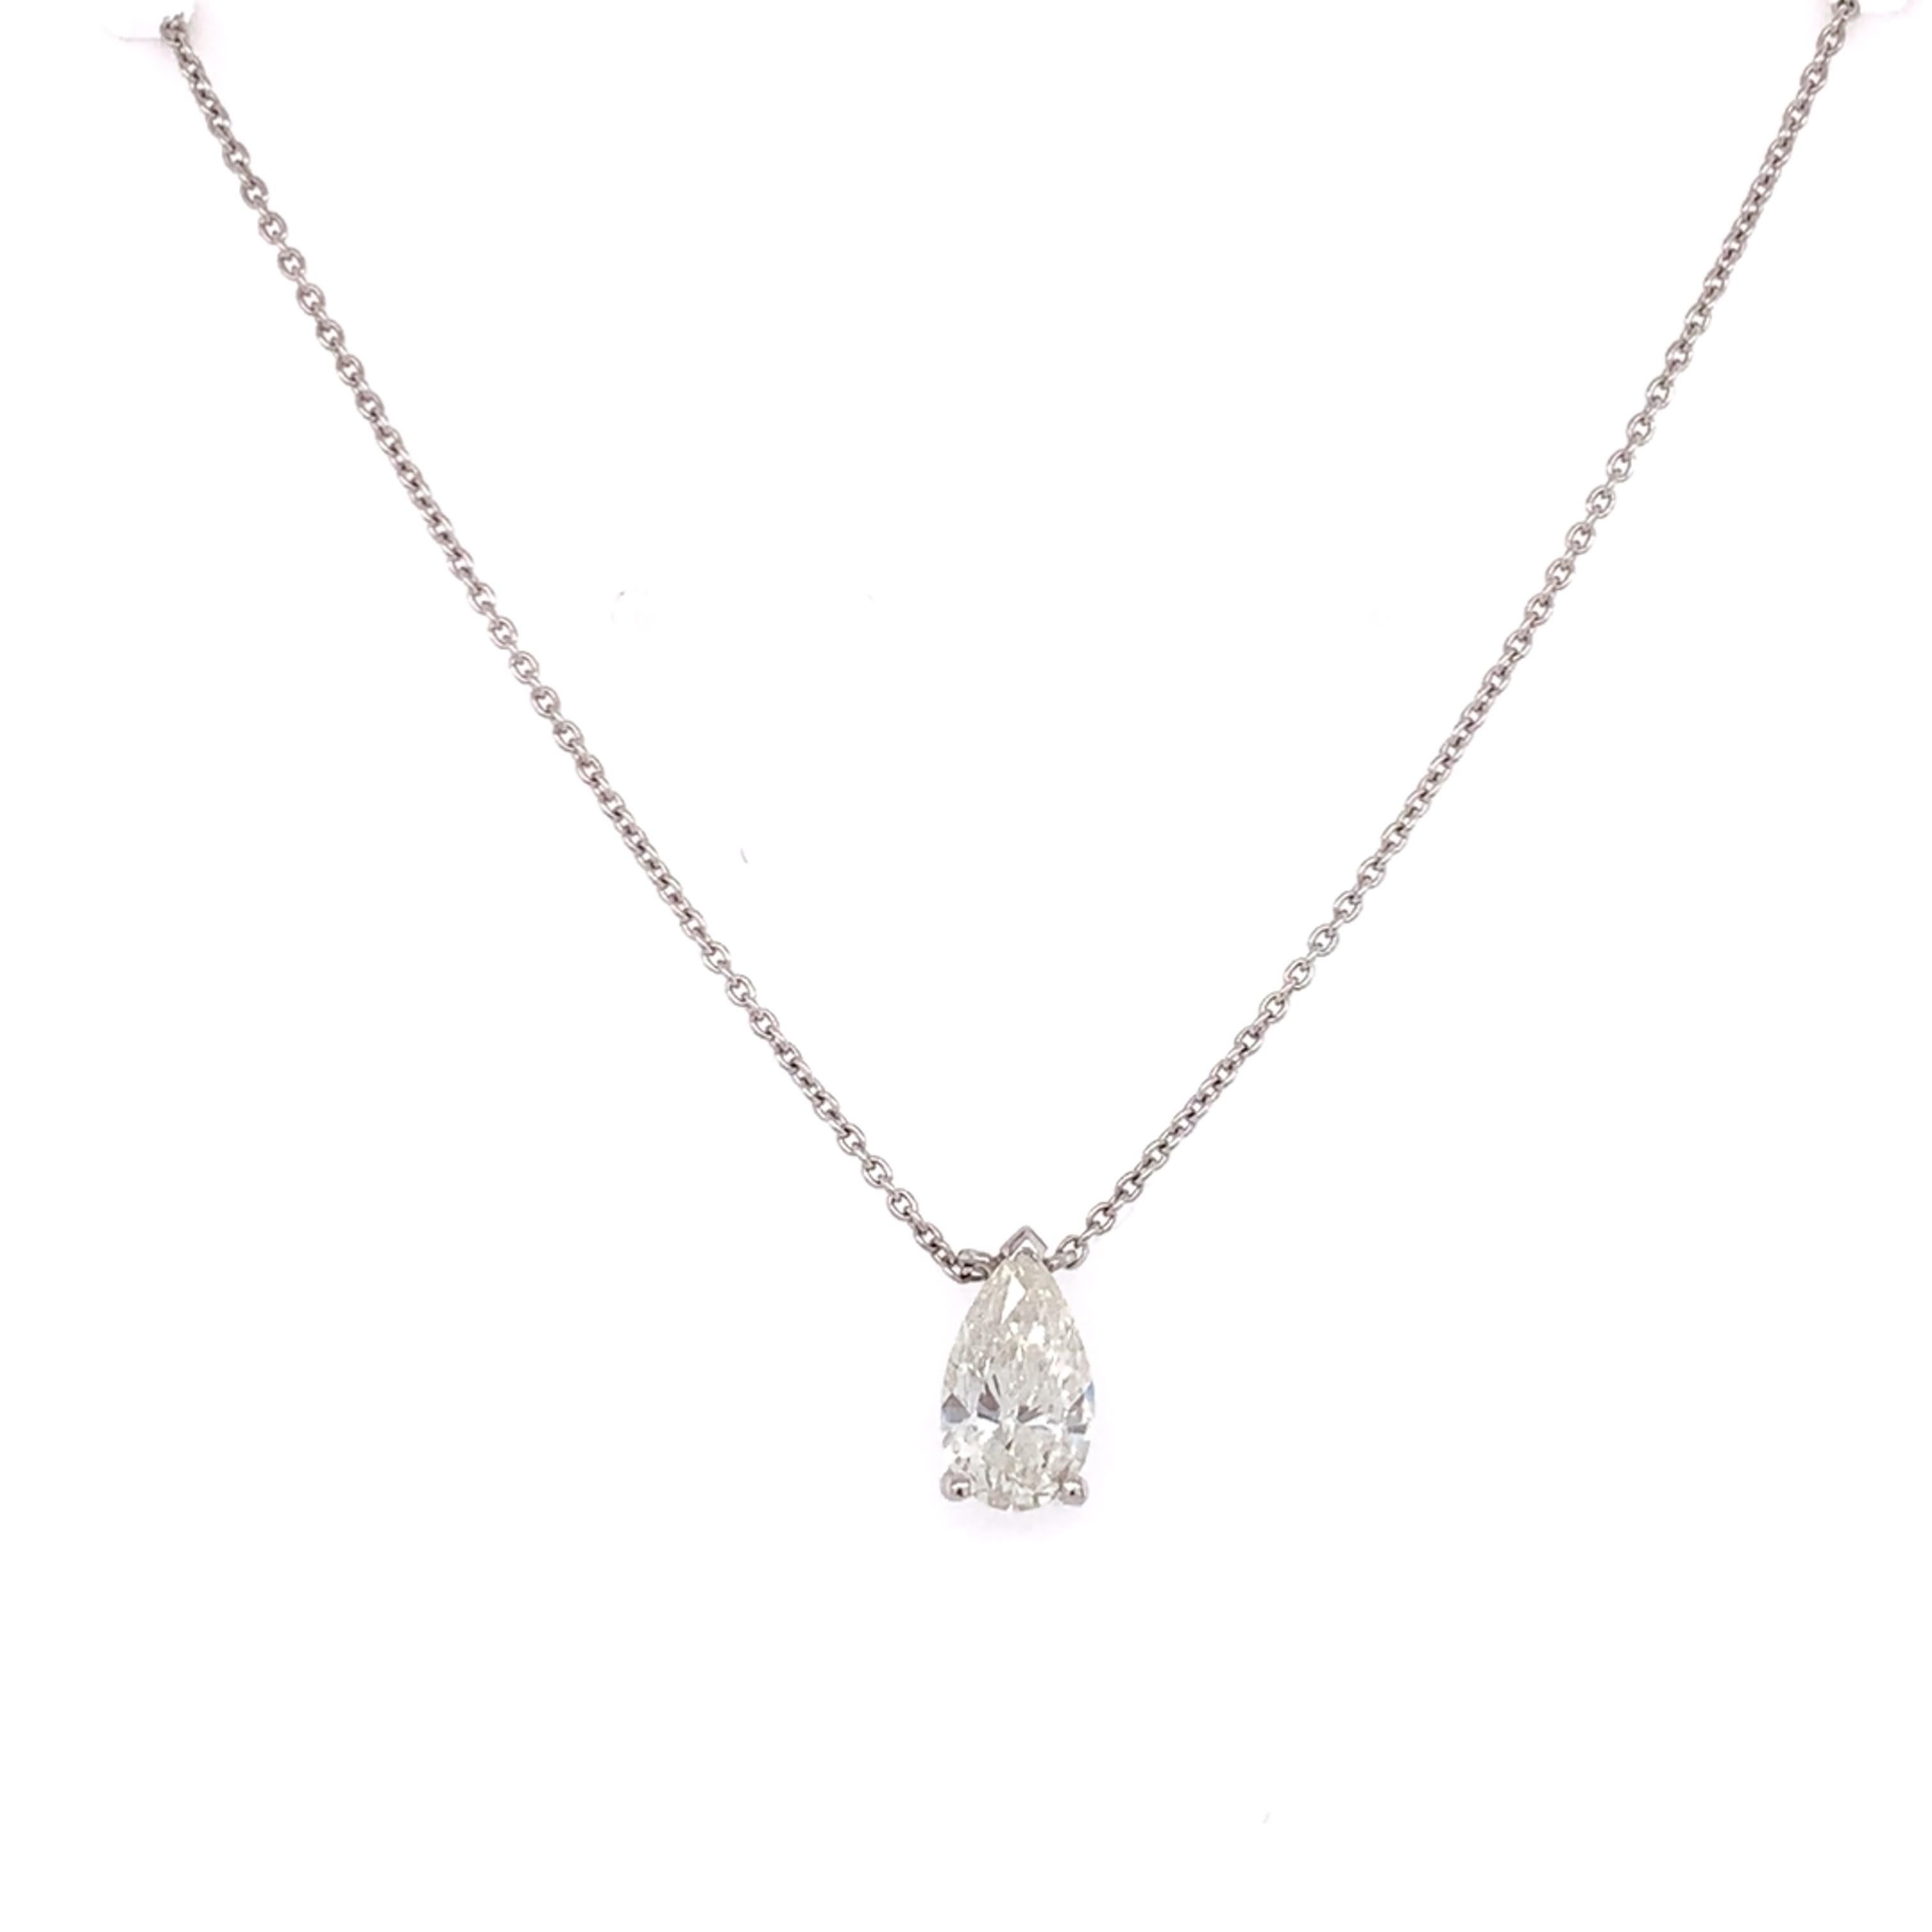 GIA Certified pear shaped diamond pendant necklace made with real/natural pear shaped diamond. Total Diamond Weight: 0.81 carats. Diamond Quantity: 1 pear shaped diamond. Color: I. Clarity: I1. Mounted on a thin 18 karat white gold adjustable chain.